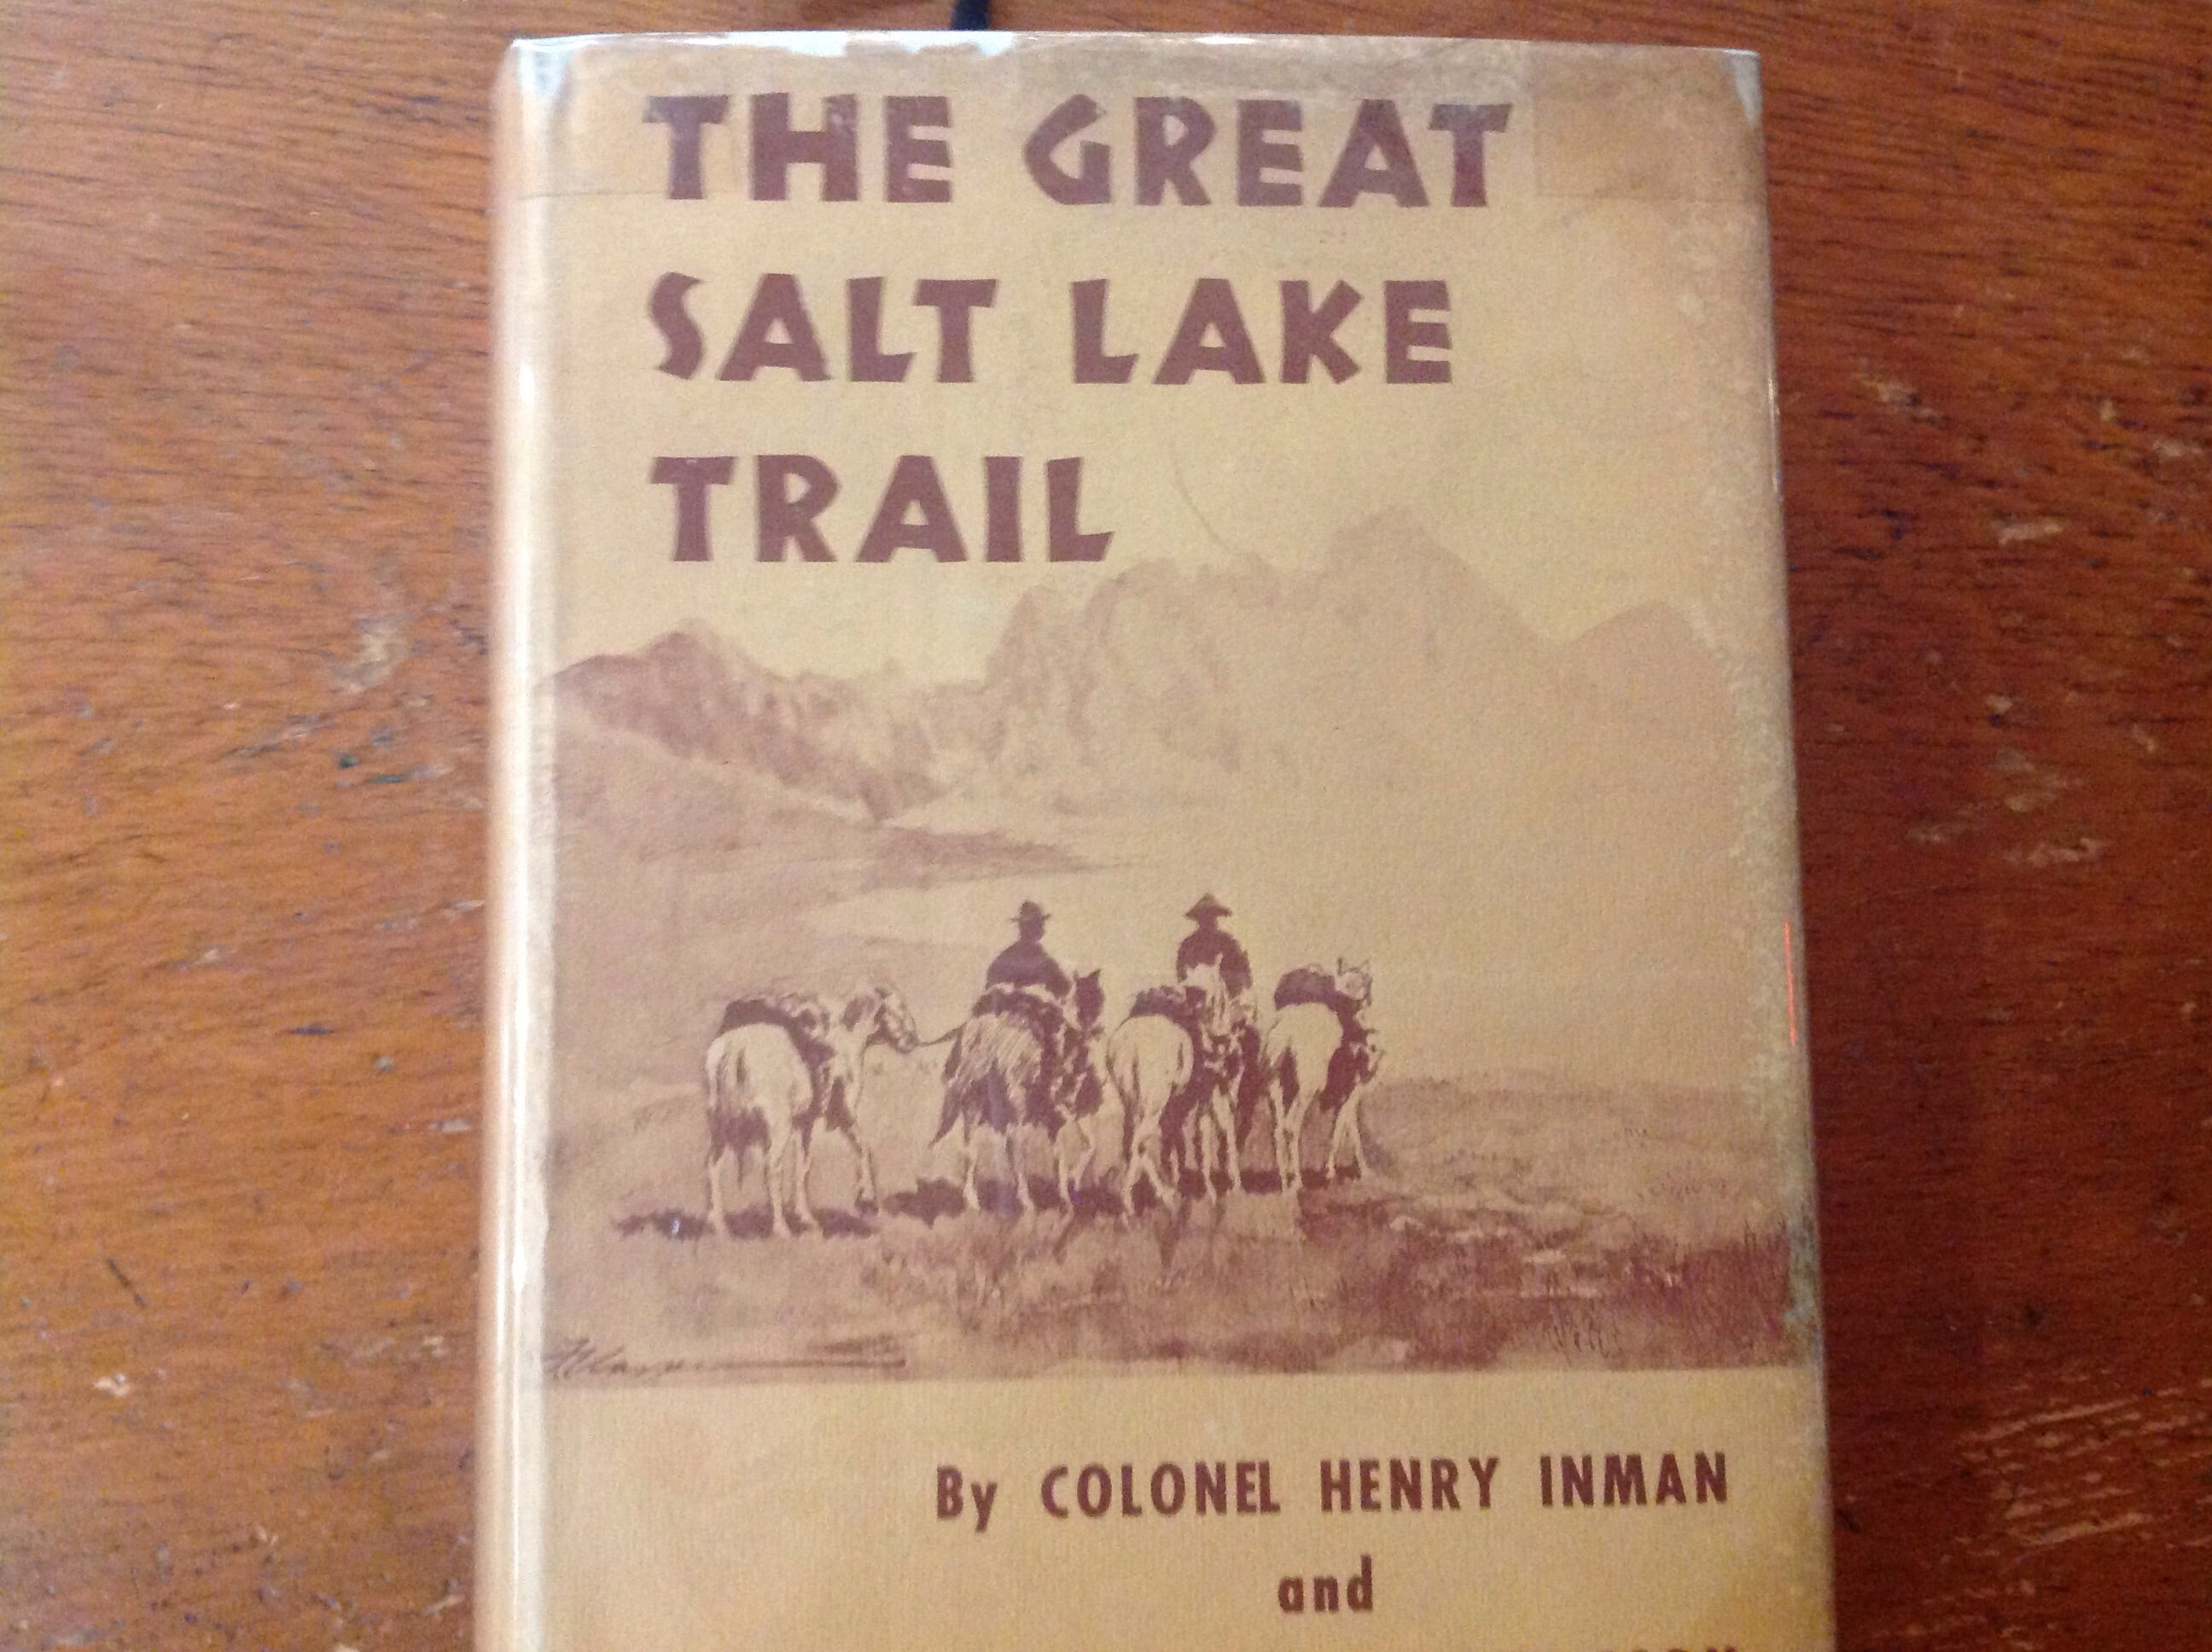 BOOKS - The Great Salt Lake Trail - Col. Henry Inman